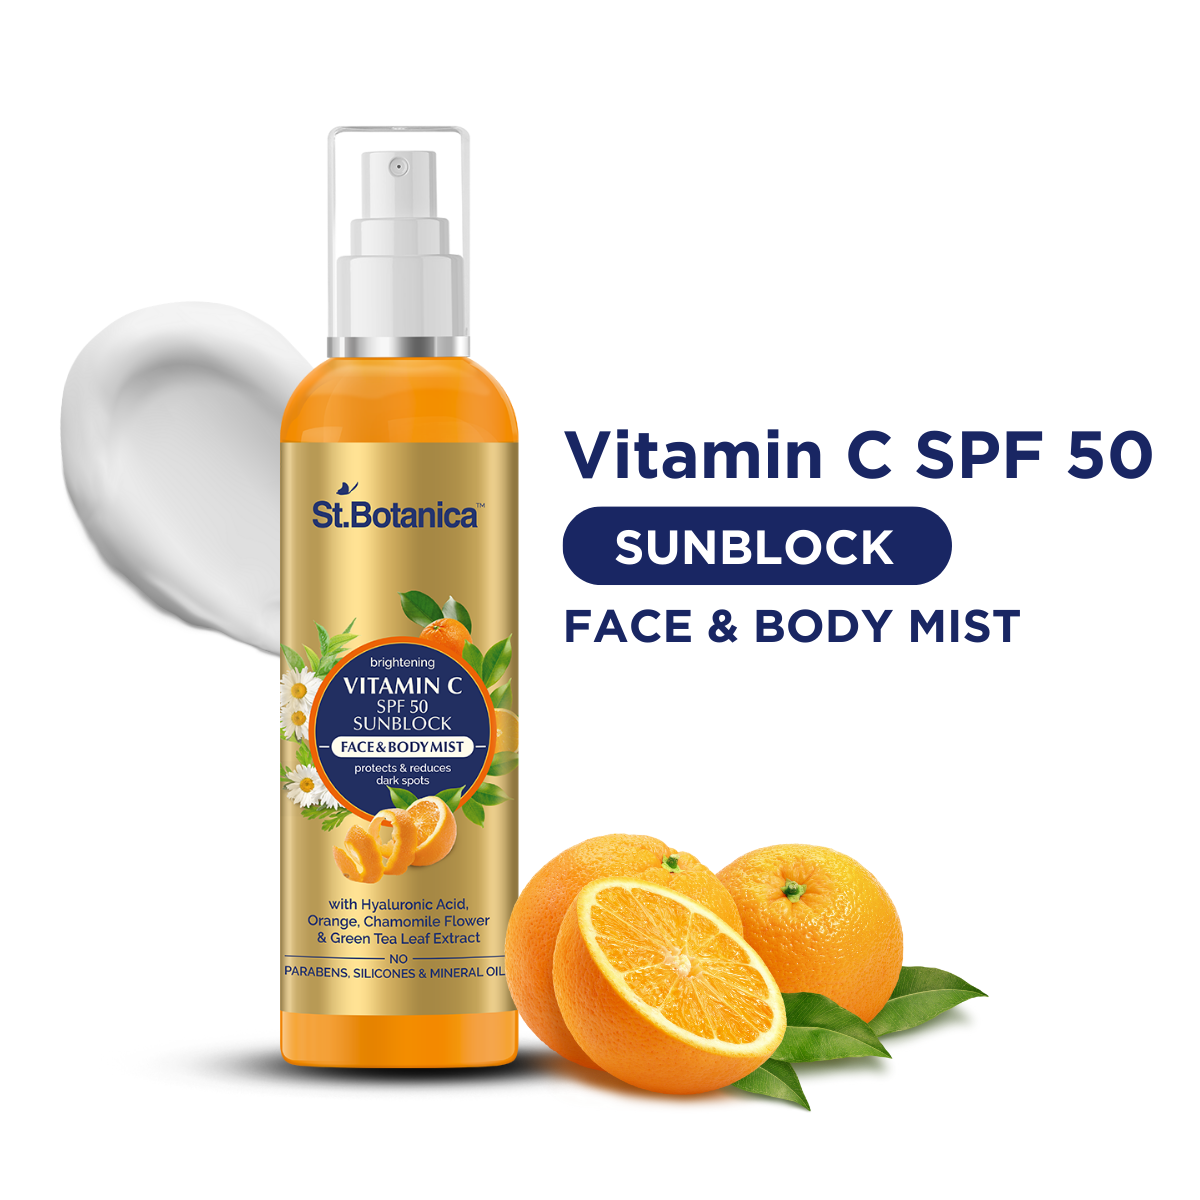 St.Botanica Vitamin C SPF 50 Sunblock Face and Body Mist Sunscreen Spray UVA/UVB Pa+++, Dry Touch, Mineral Based and Water Resistant, 120 ml (STBOT585)